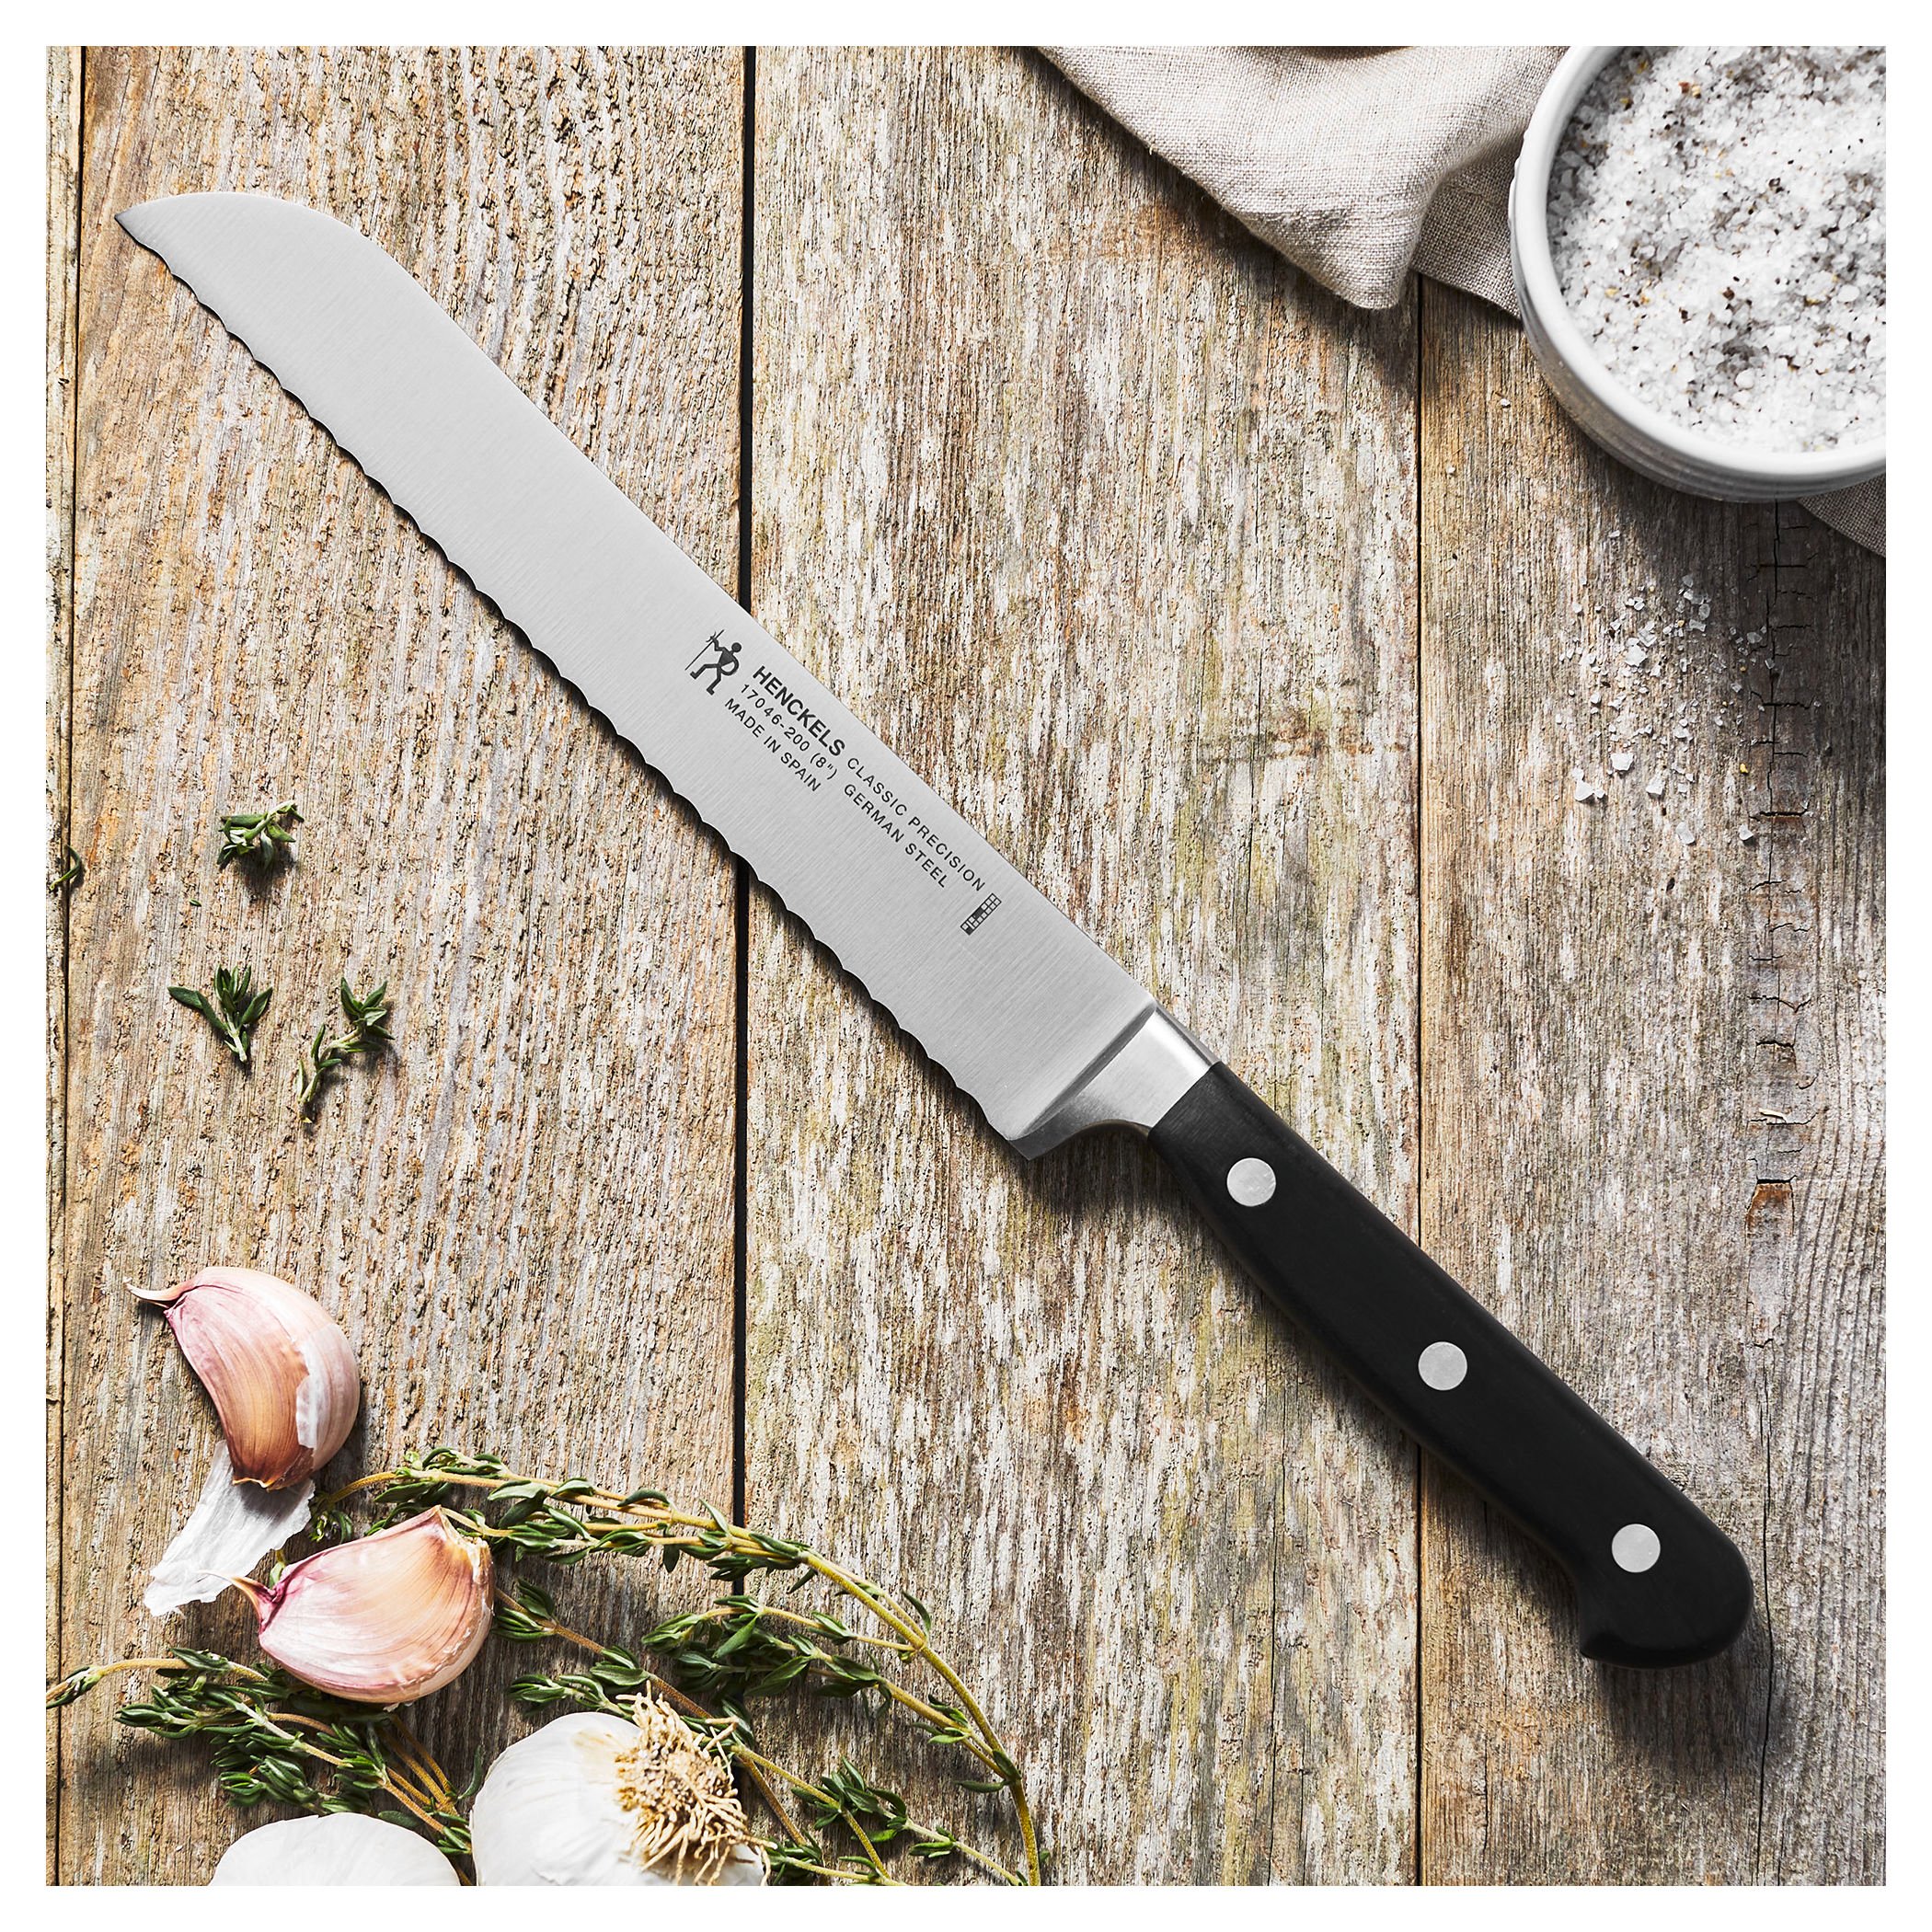 2 X 8 inch Bread Knife Sharp Stainless Steel Serrated Edges Blade